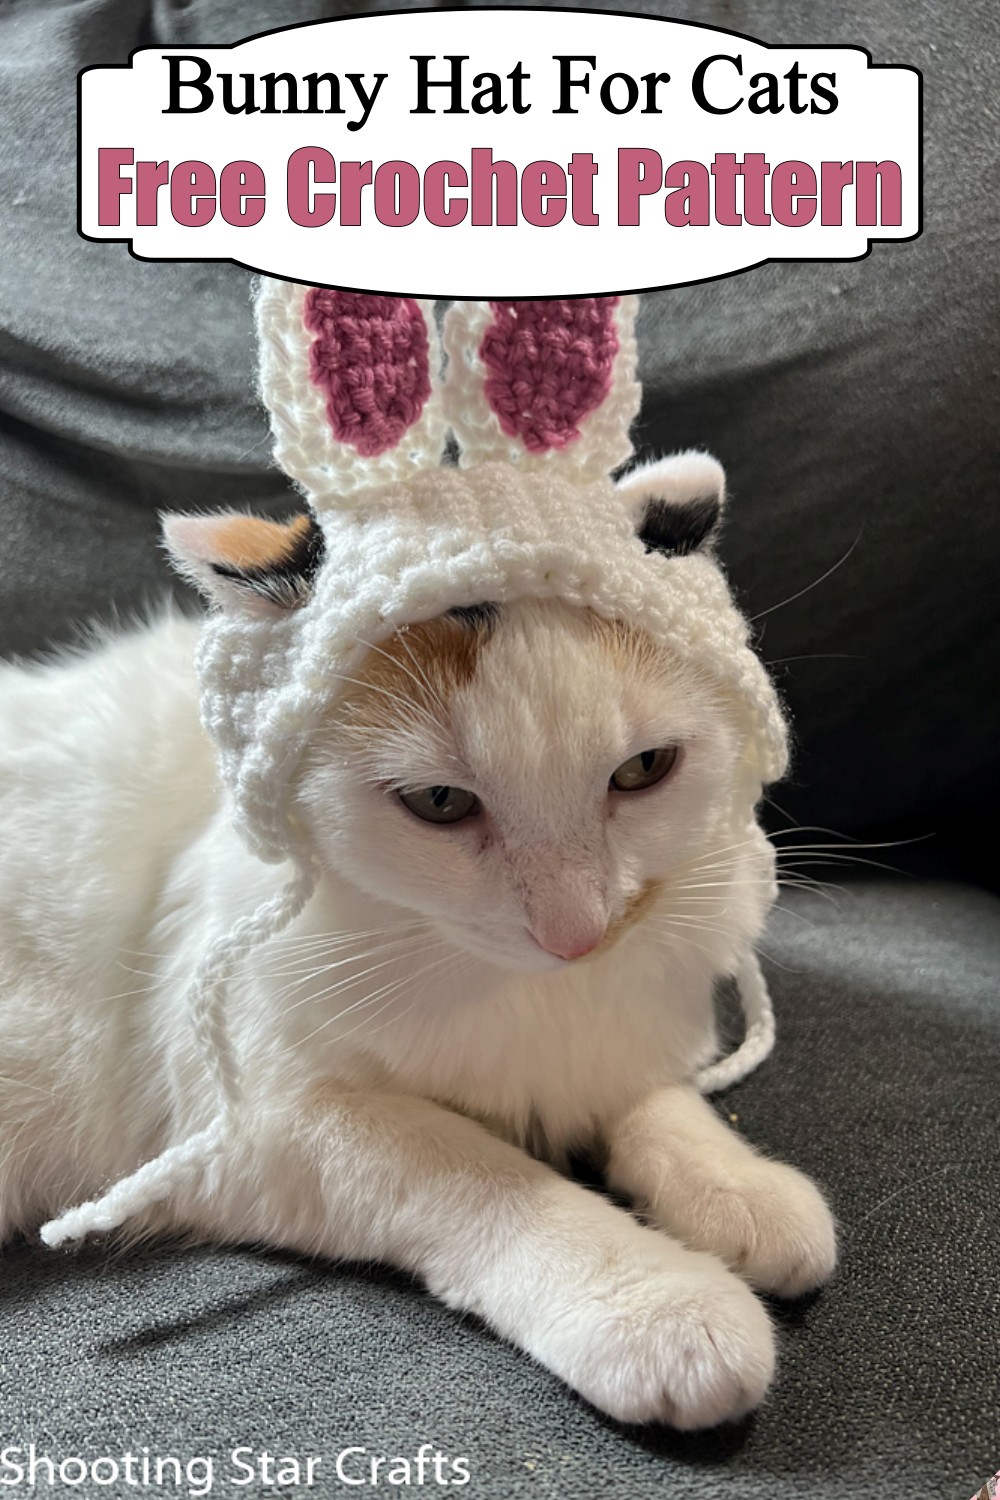 Bunny Hat For Cats